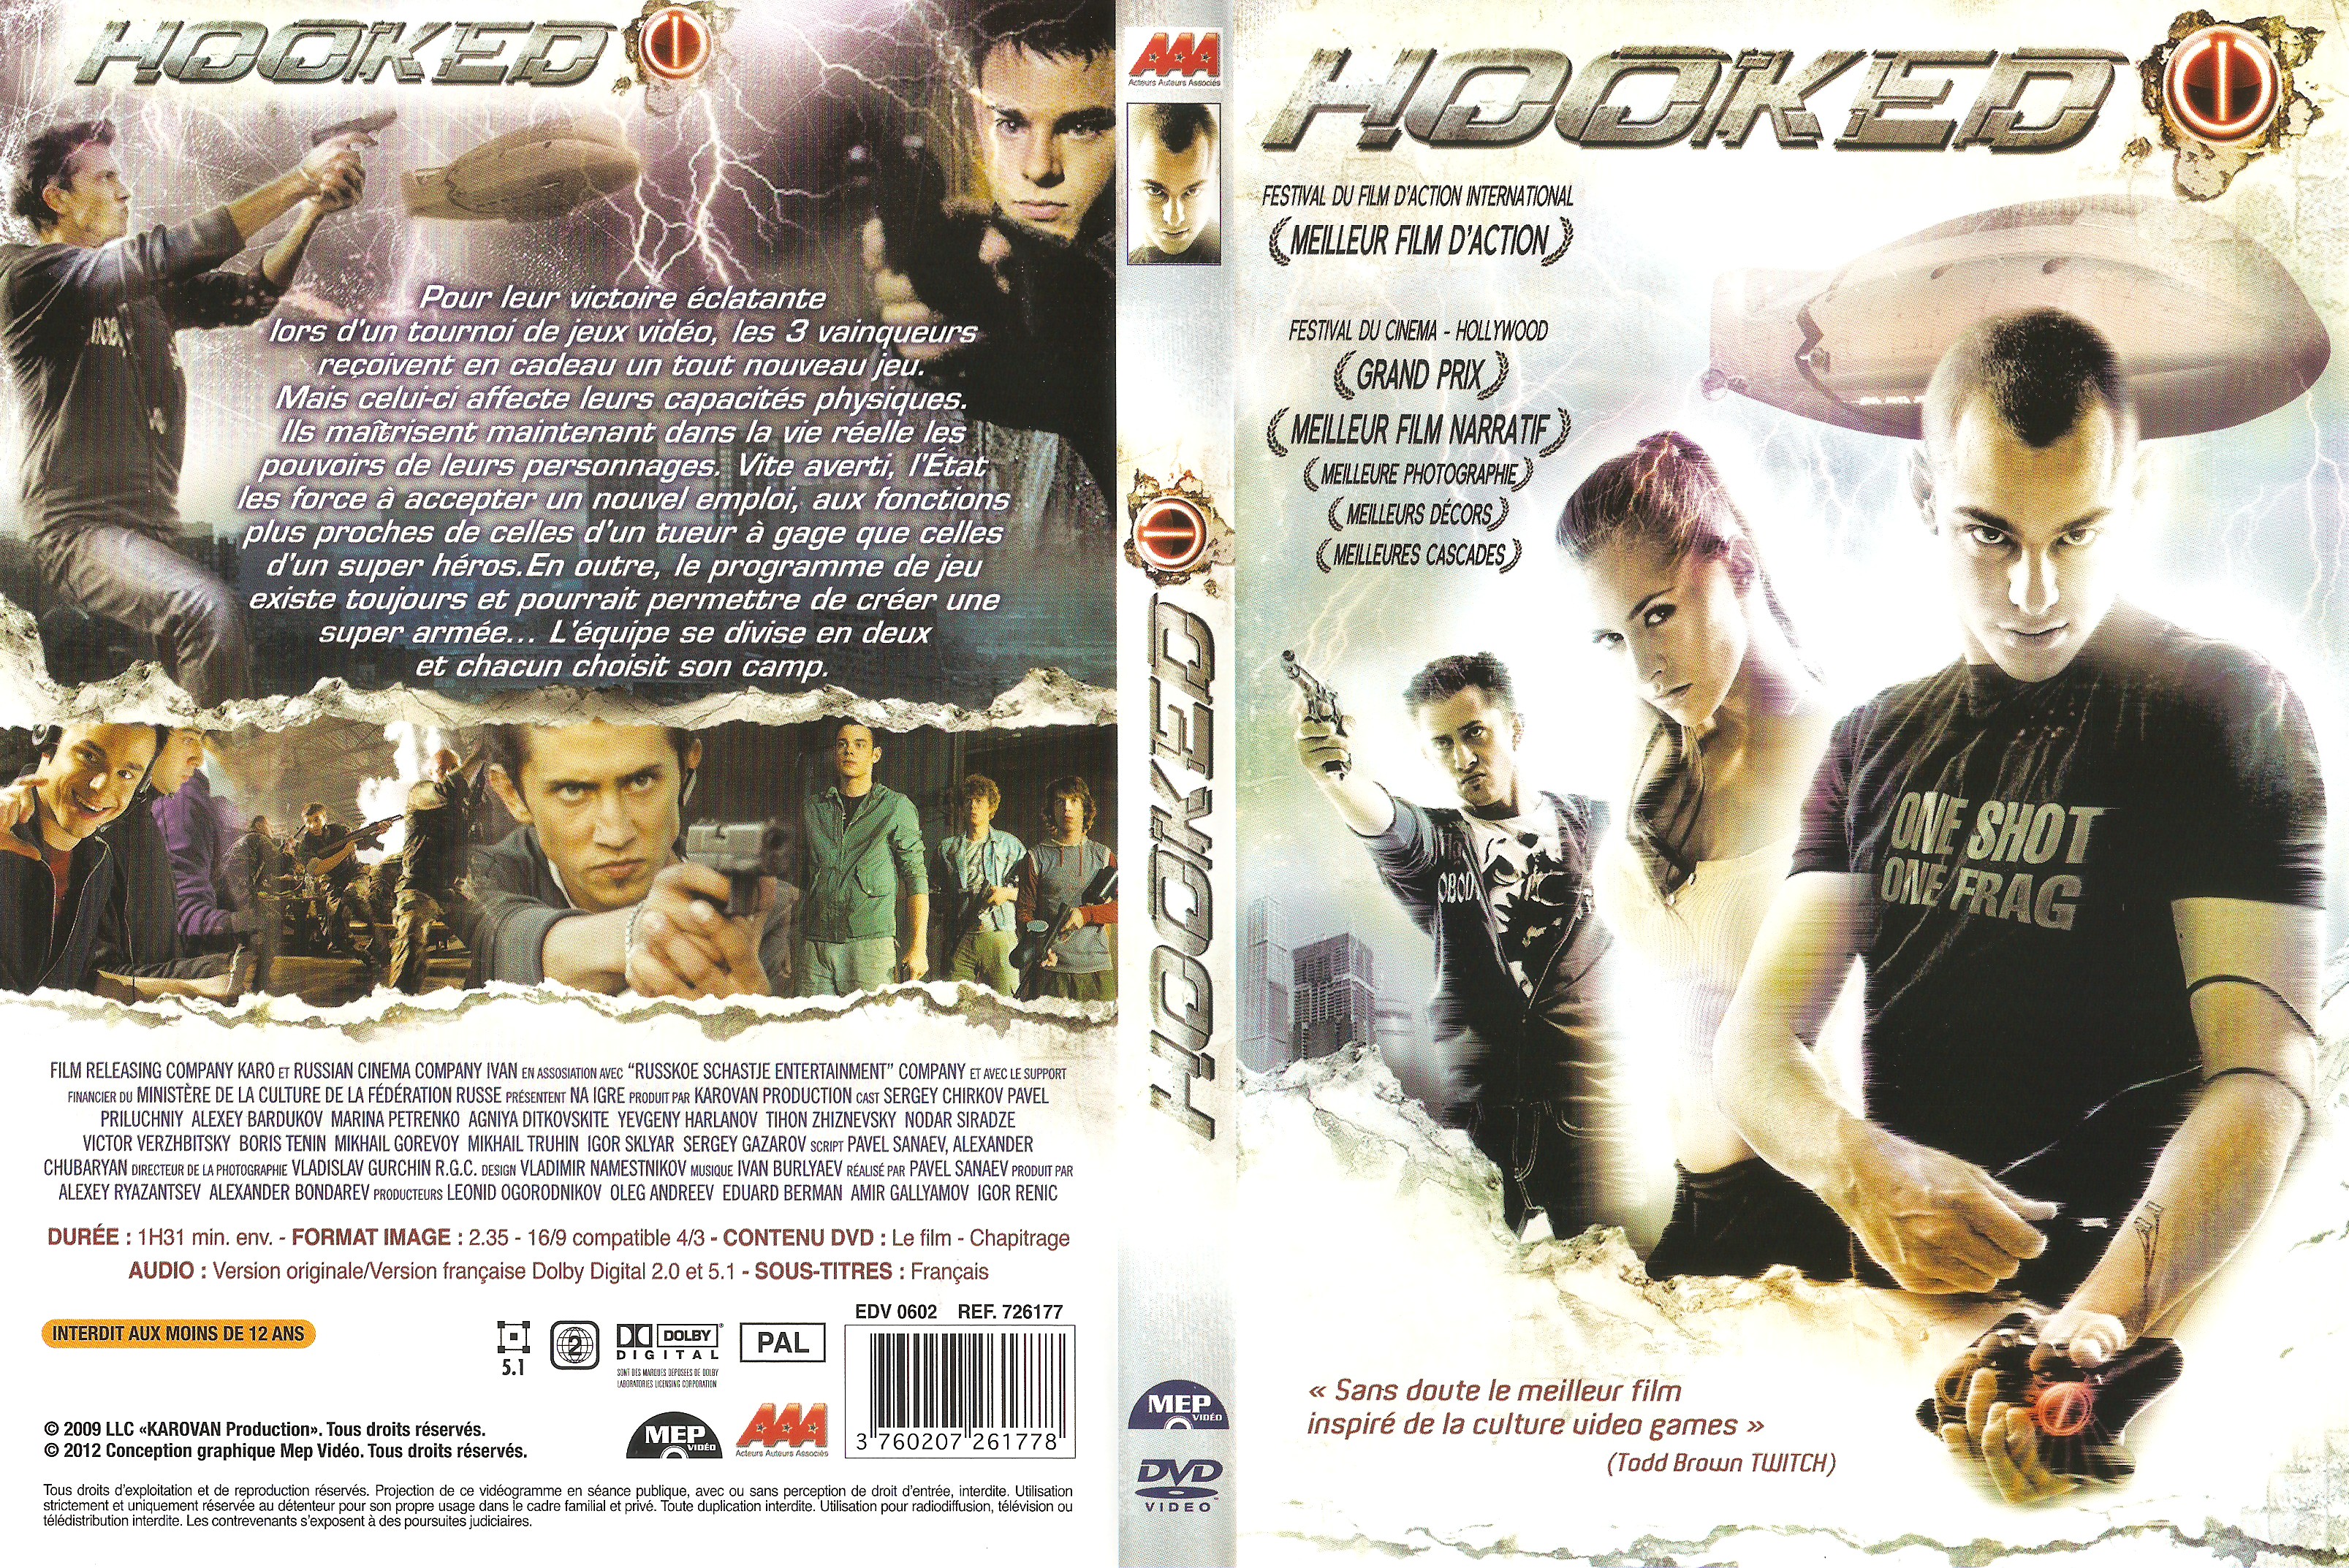 Jaquette DVD Hooked